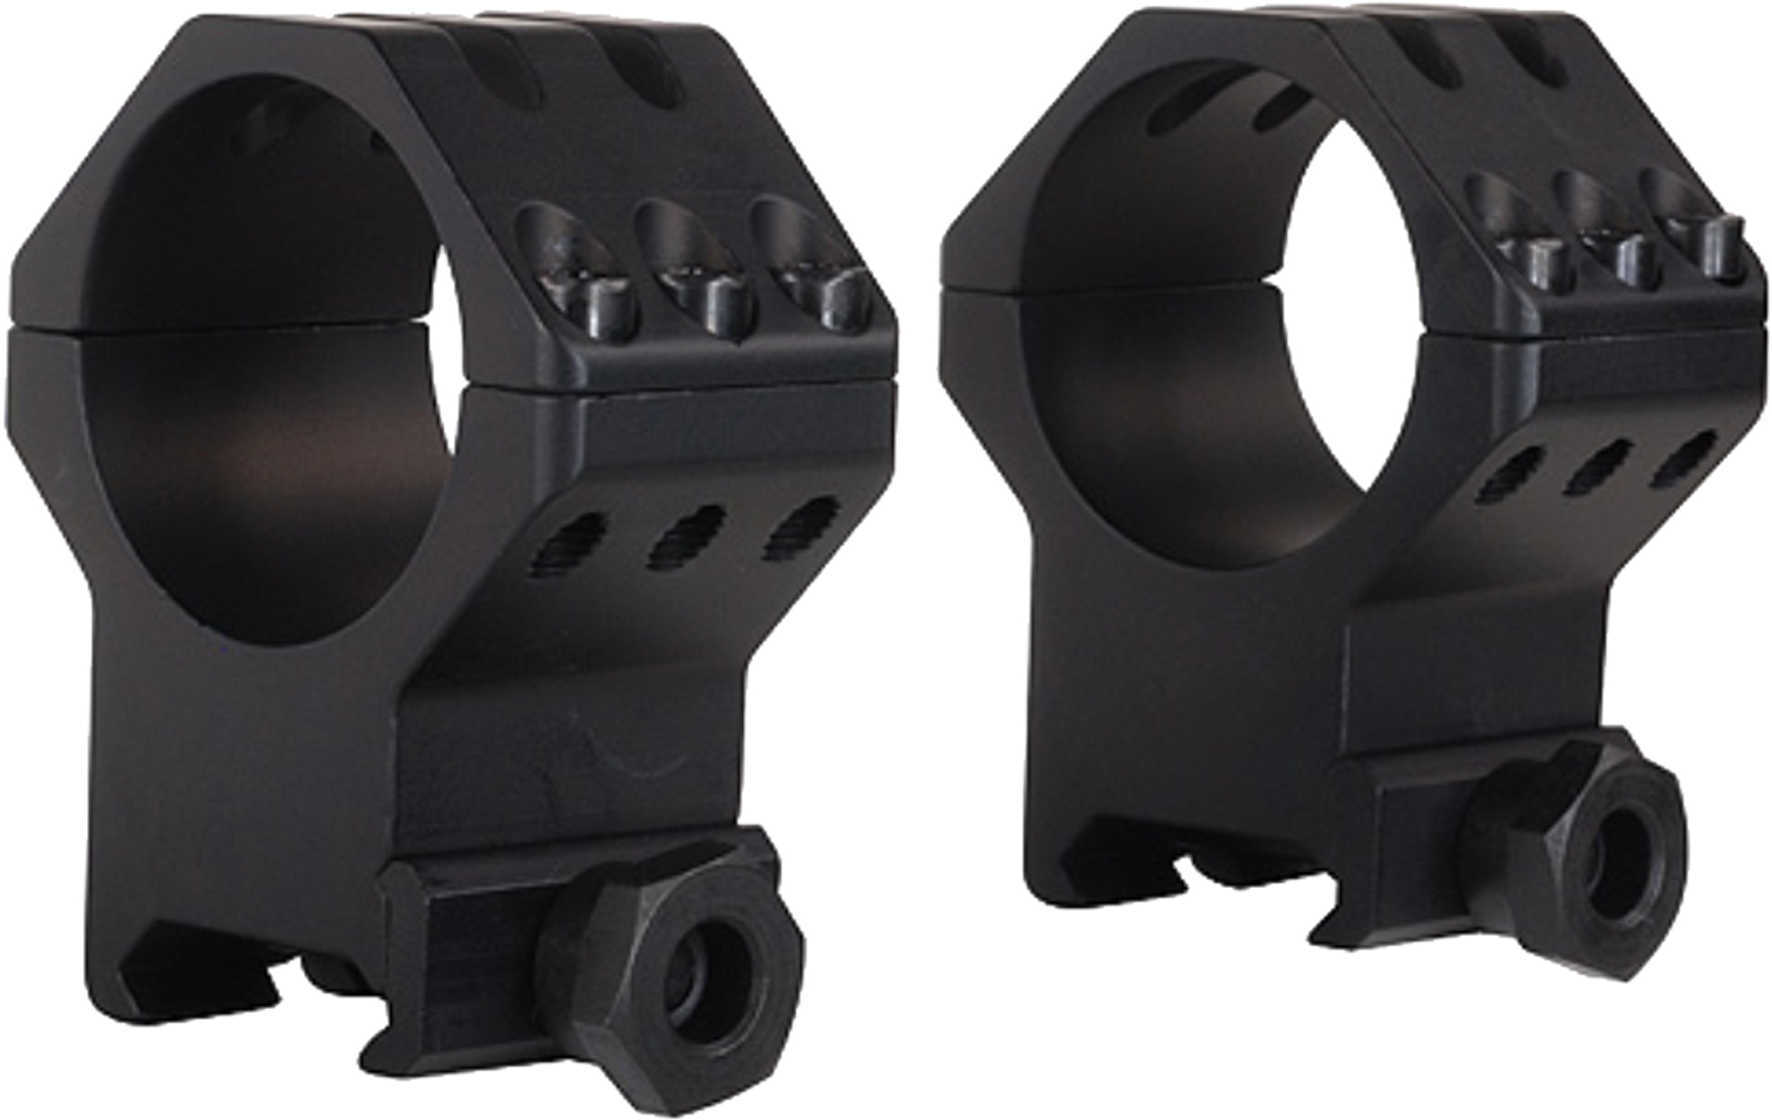 Weaver Tactical 6-Hole Picatinny Rings X-High 30mm - Same six screws for maximum security and clamping pres 99695